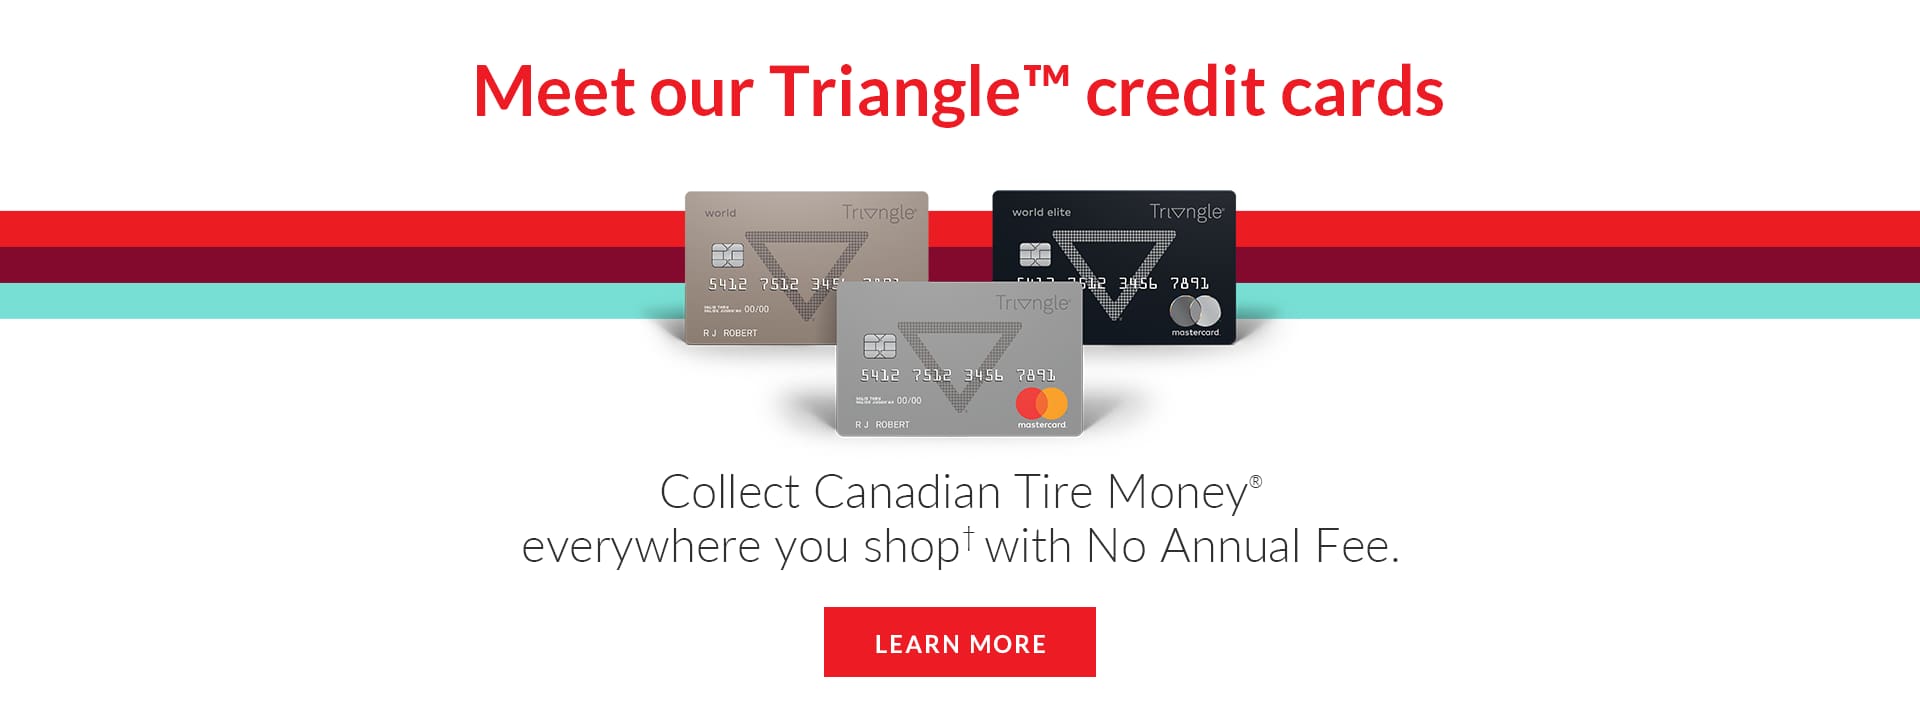 Header image - top text: Meet Our Triangle Credit Cards - Image of three Triangle branded mastercards - Middle text: Collect Canadian Tire Money everywhere you shop with No Annual Fee - bottom text: learn More - Image links to info page about credit card products